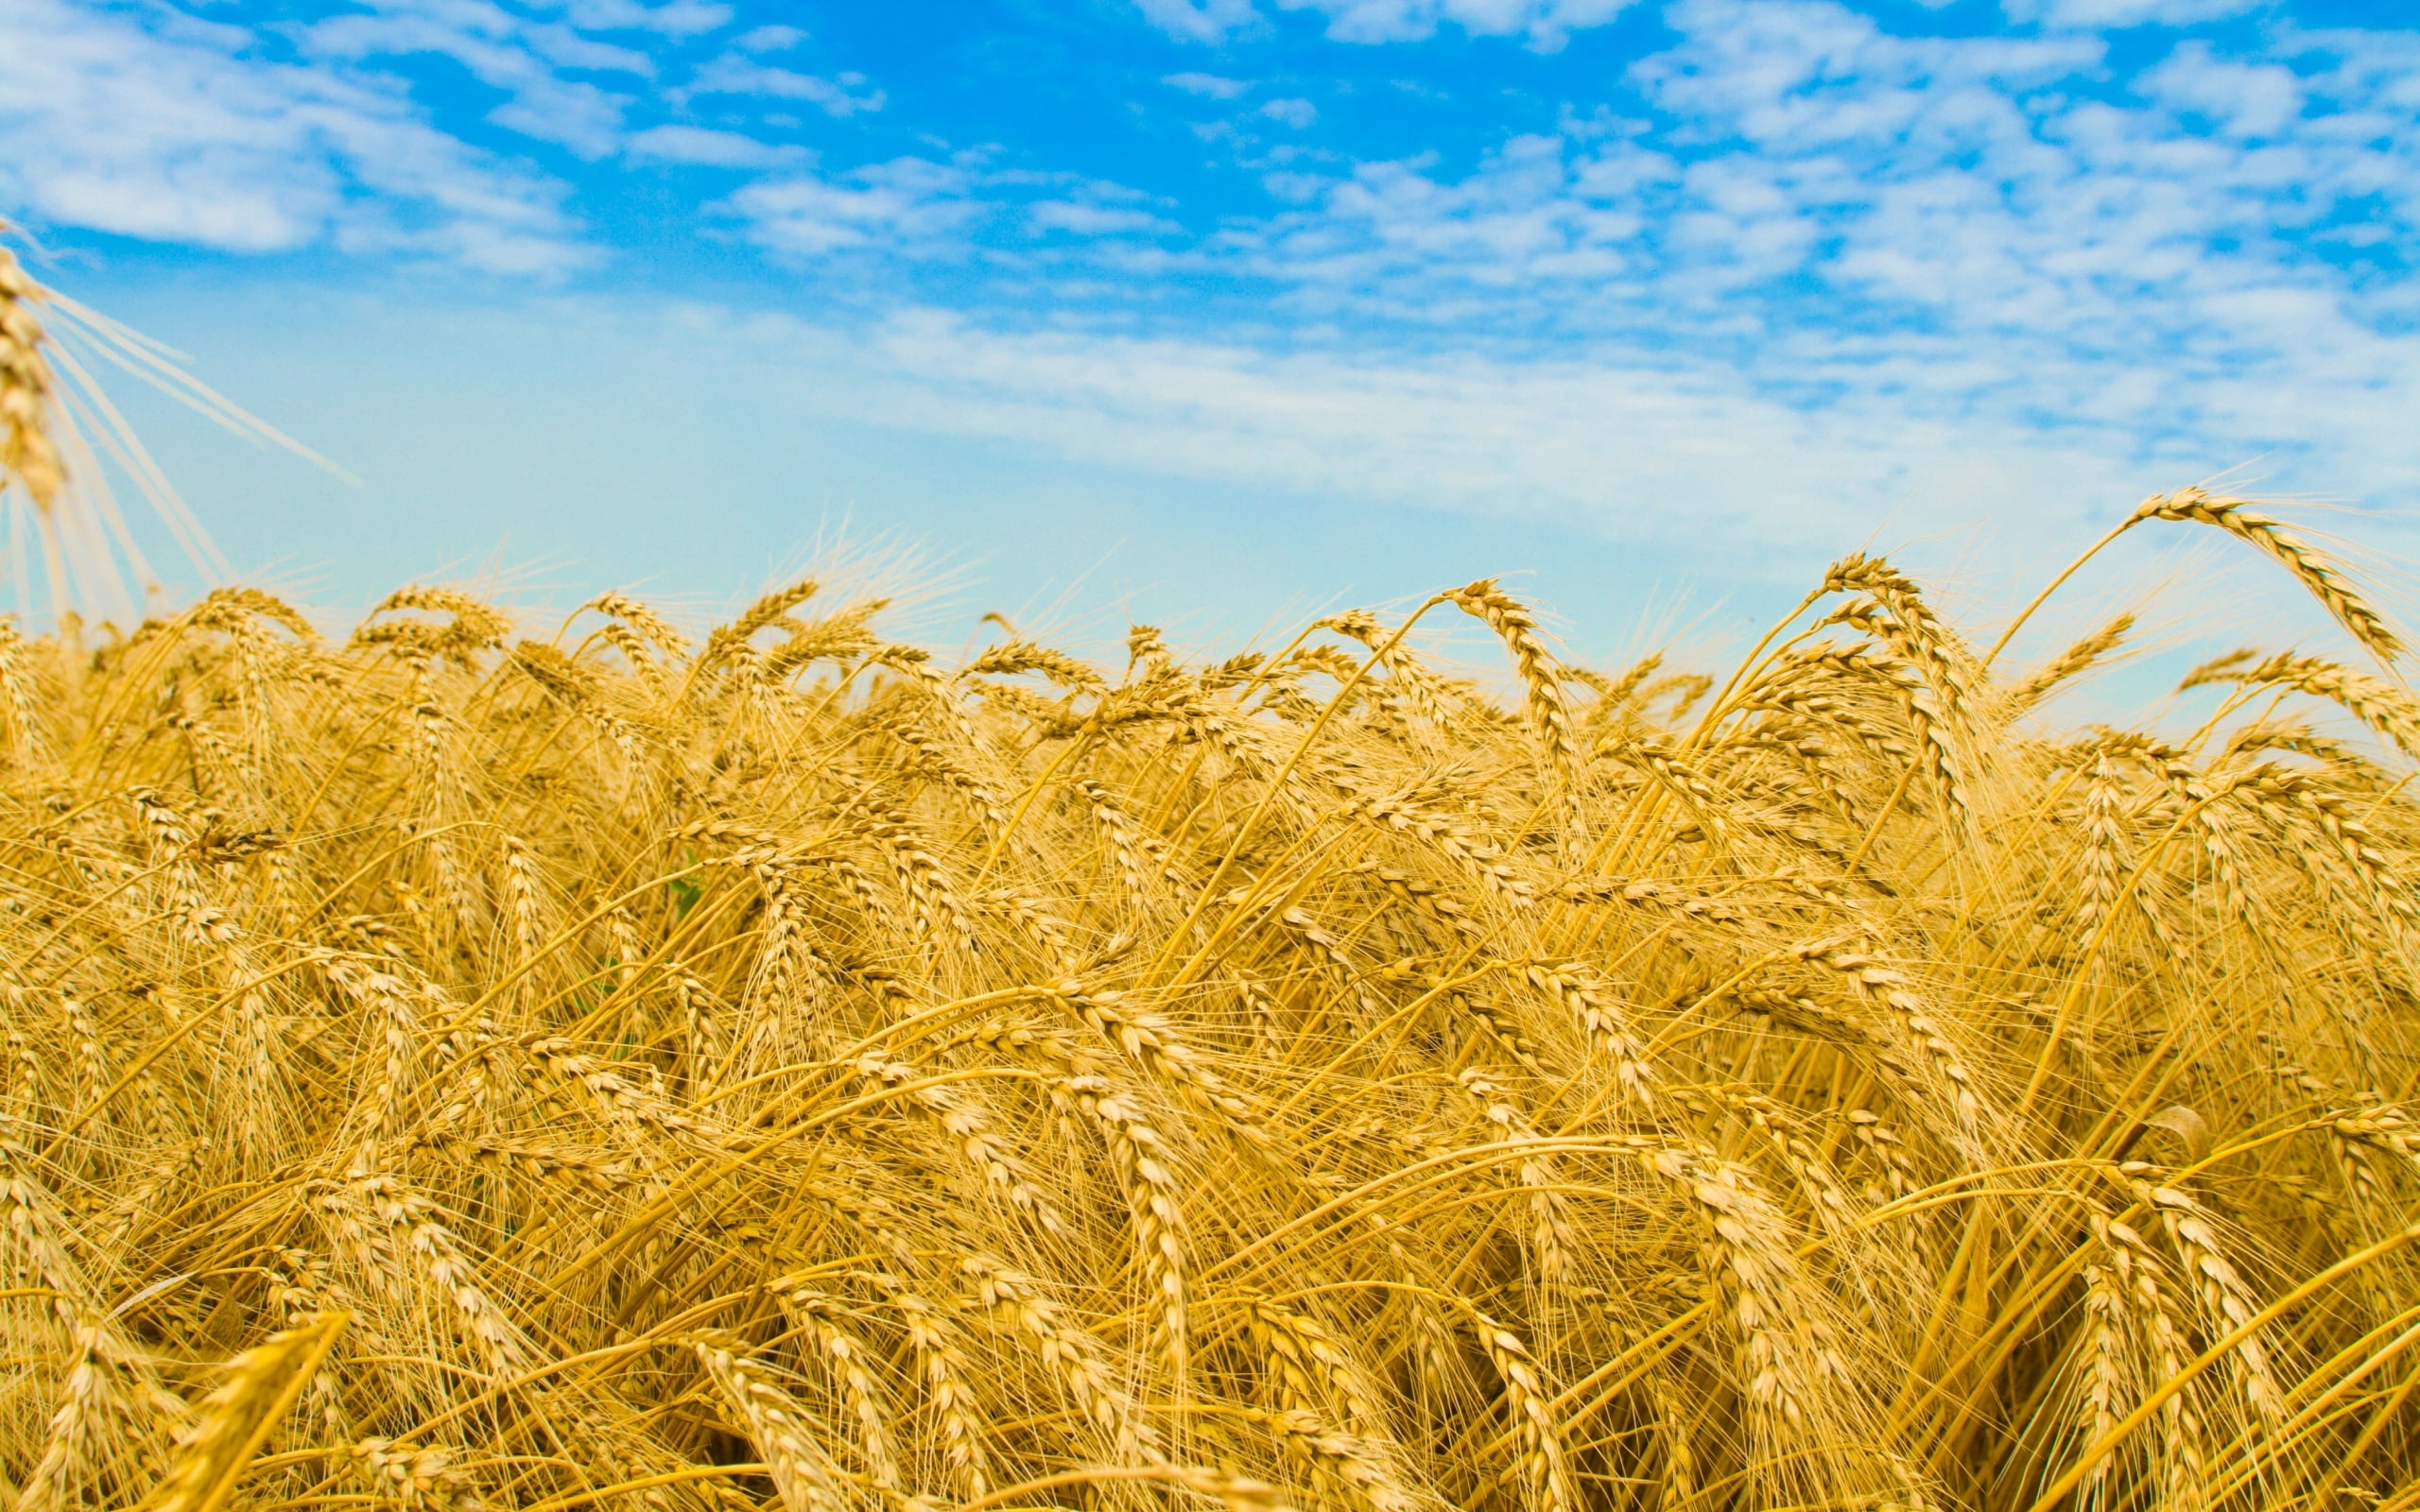 brown wheat field, rye, ears, golden, sky, agriculture, nature